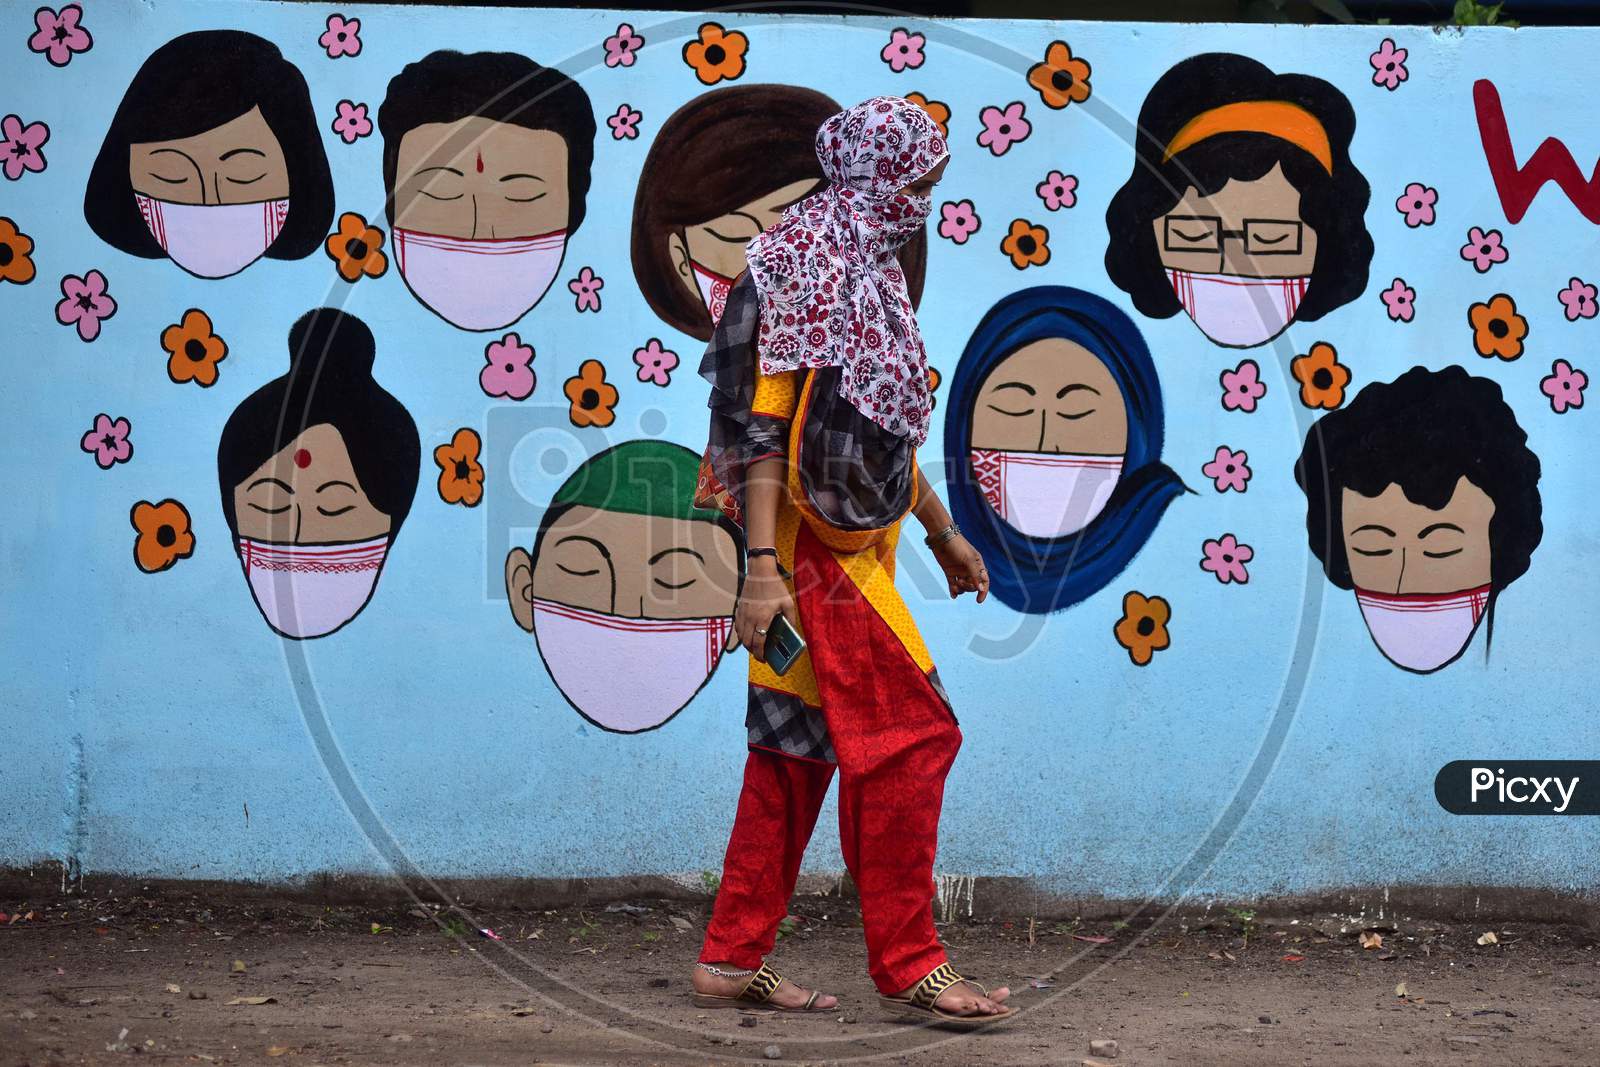 A Woman Walks In Front Of Wall Graffiti During Ongoing Covid19 Lockdown In Nagaon District In The Northeastern State Of Assam, India On June 9,2020